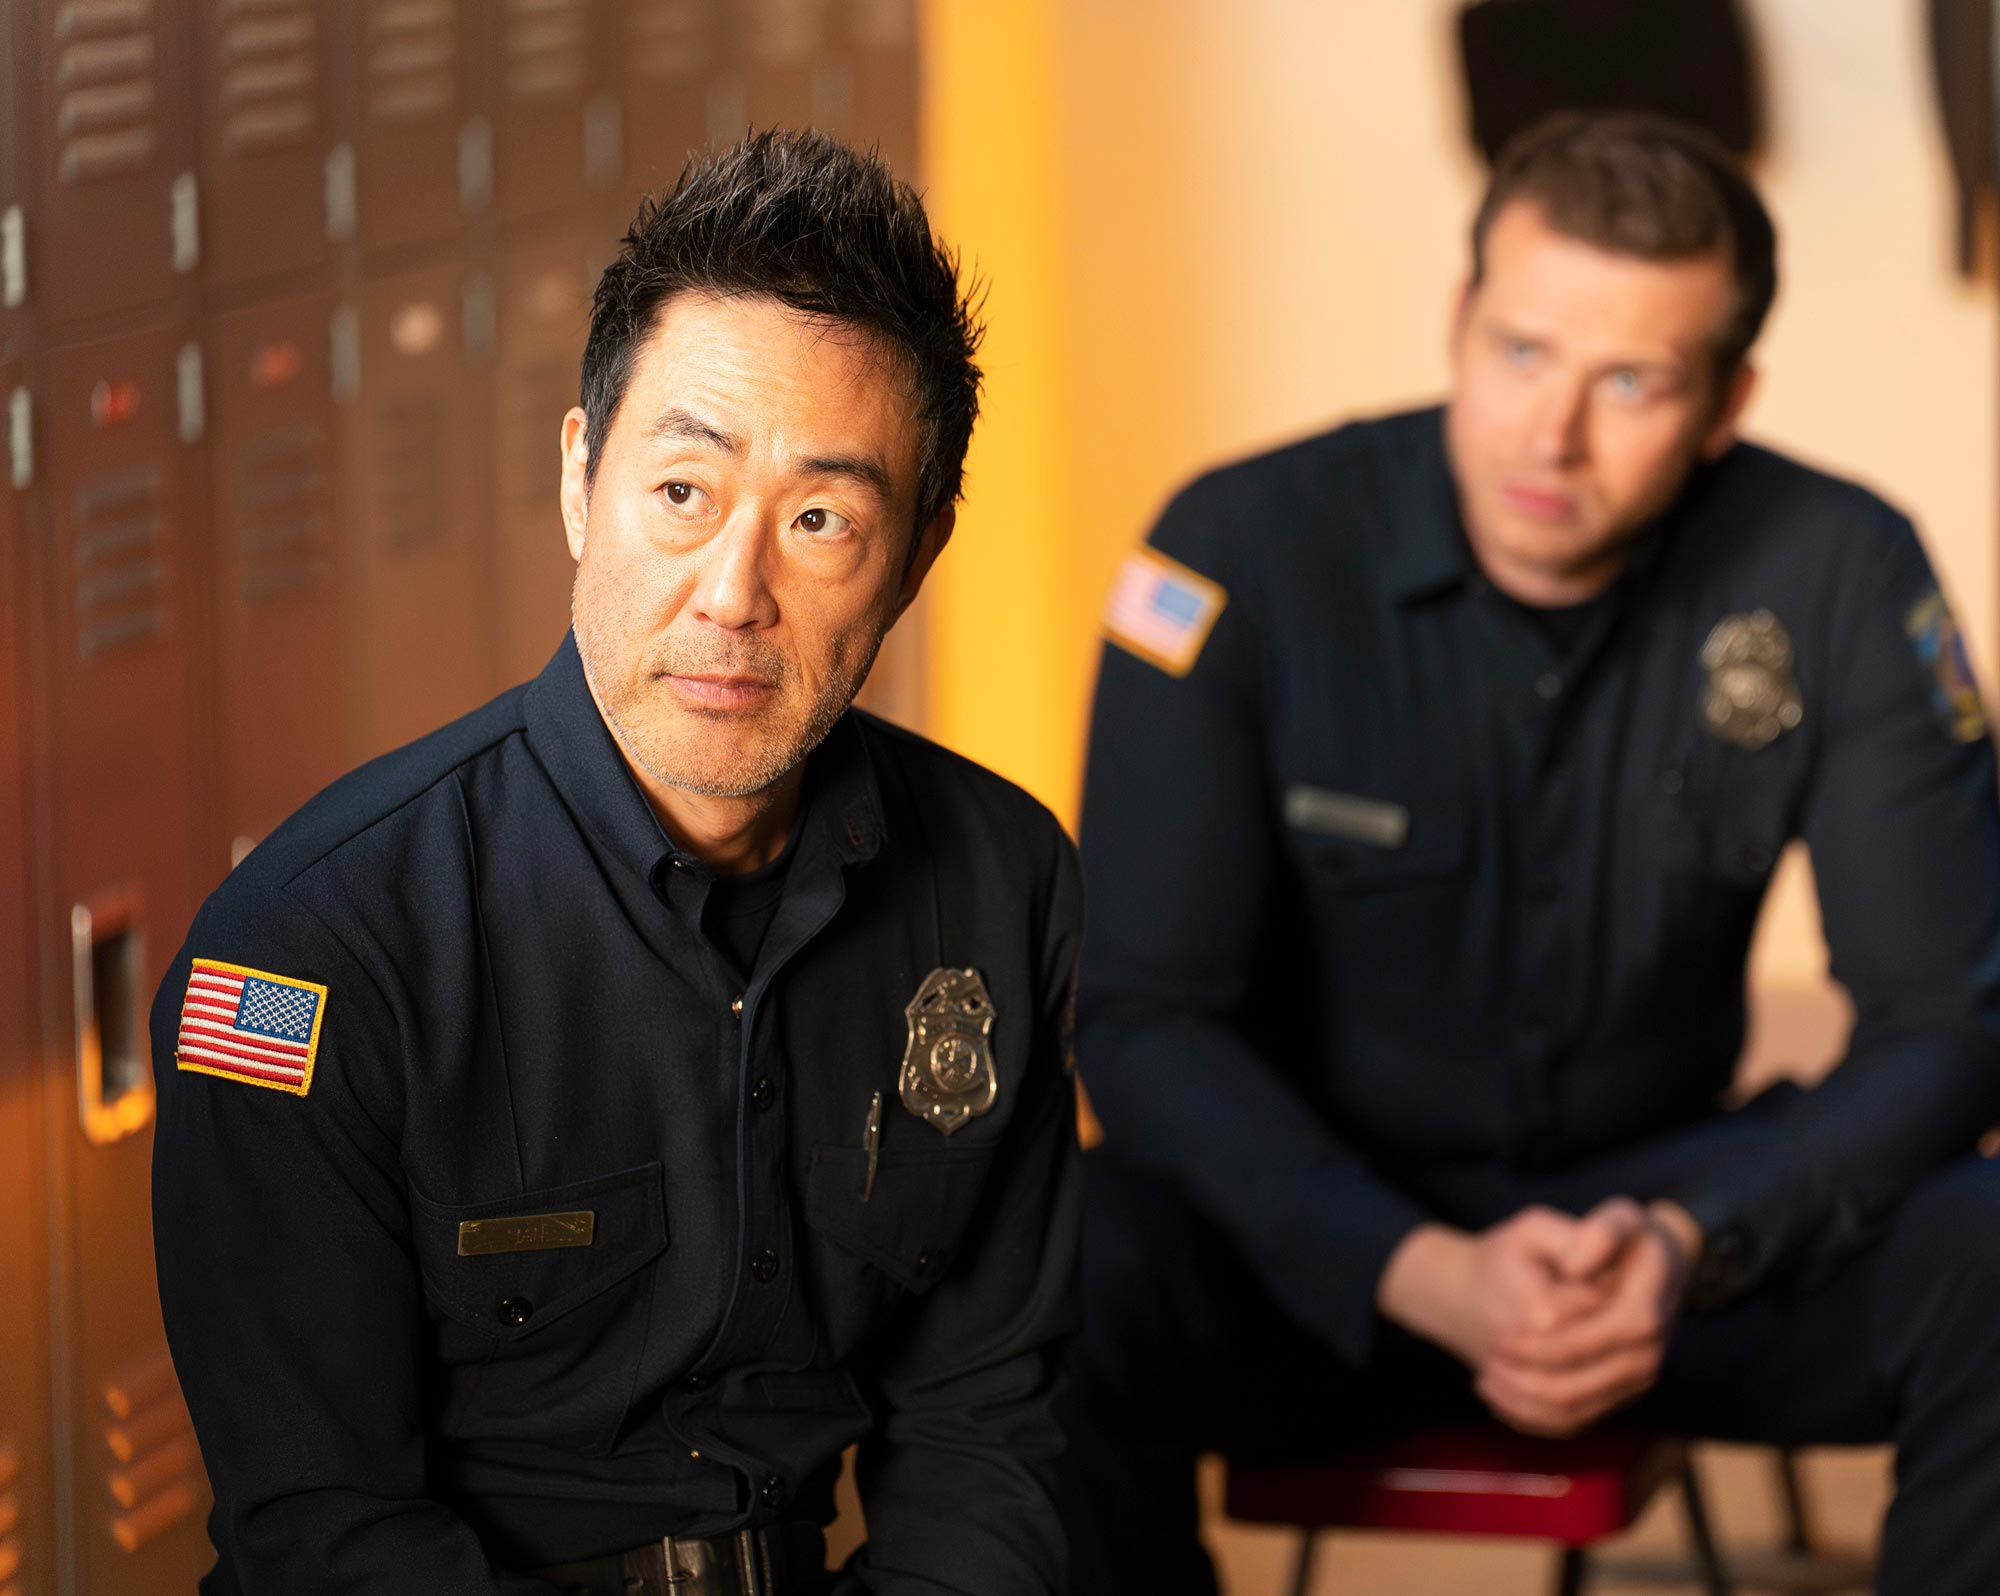 9-1-1’s Kenneth Choi and Jennifer Love Hewitt Talk Bringing 'Madney' to Life